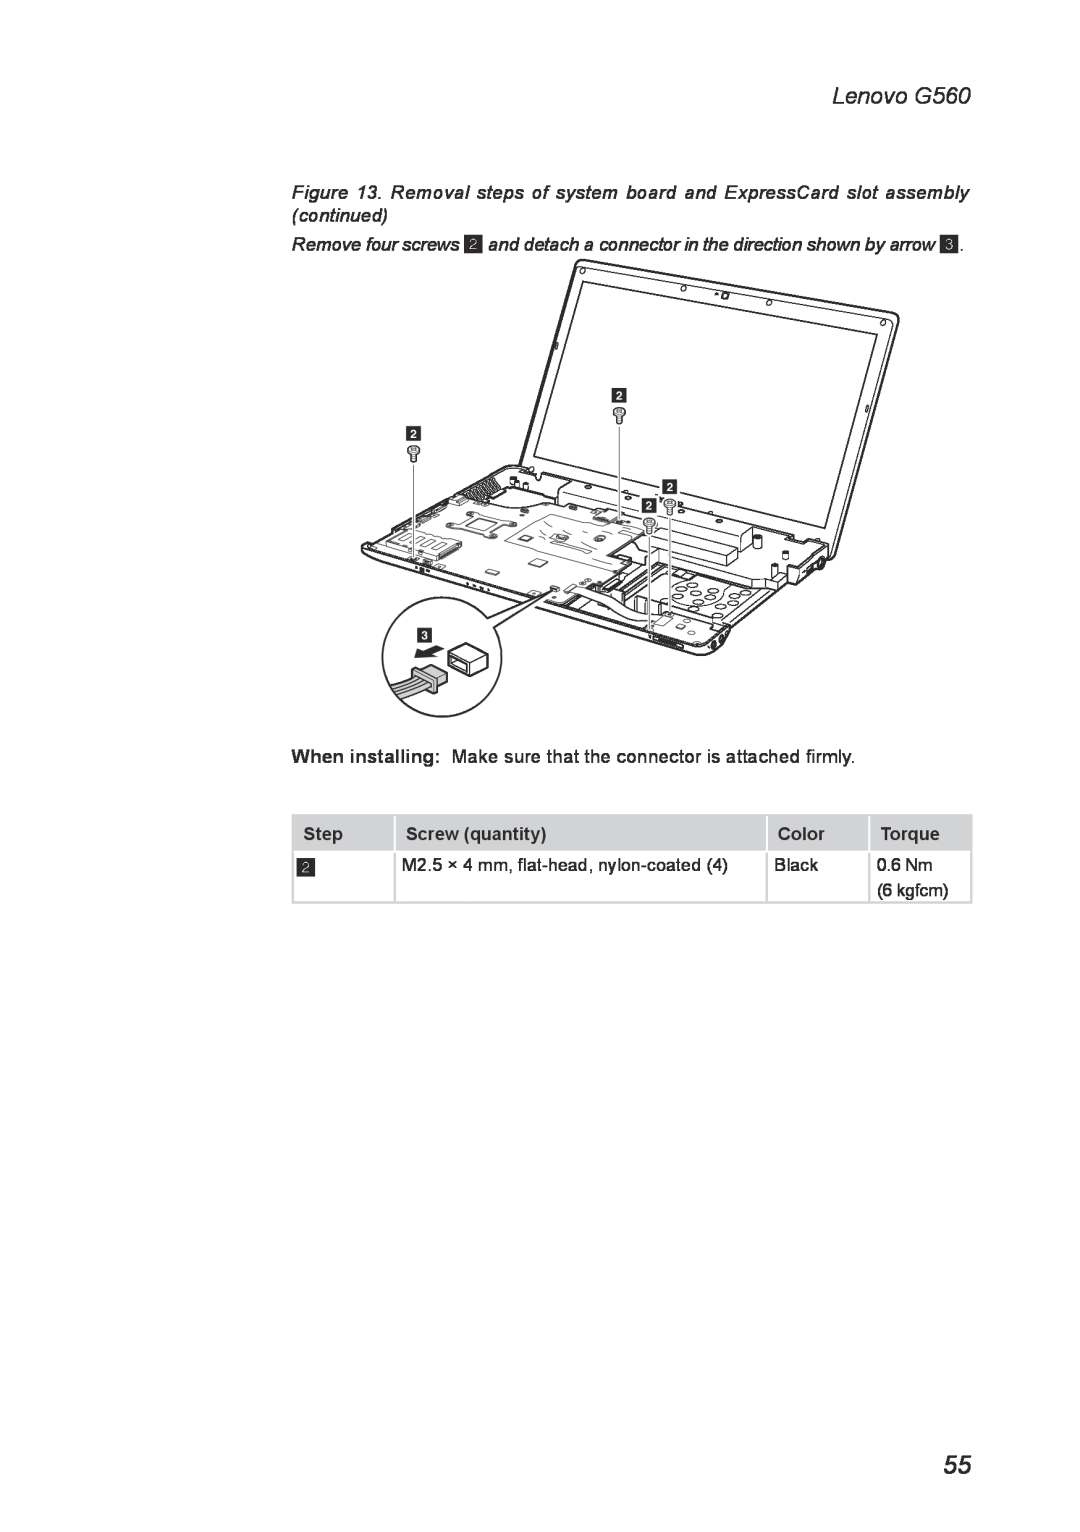 Lenovo manual Lenovo G560, When installing Make sure that the connector is attached firmly 